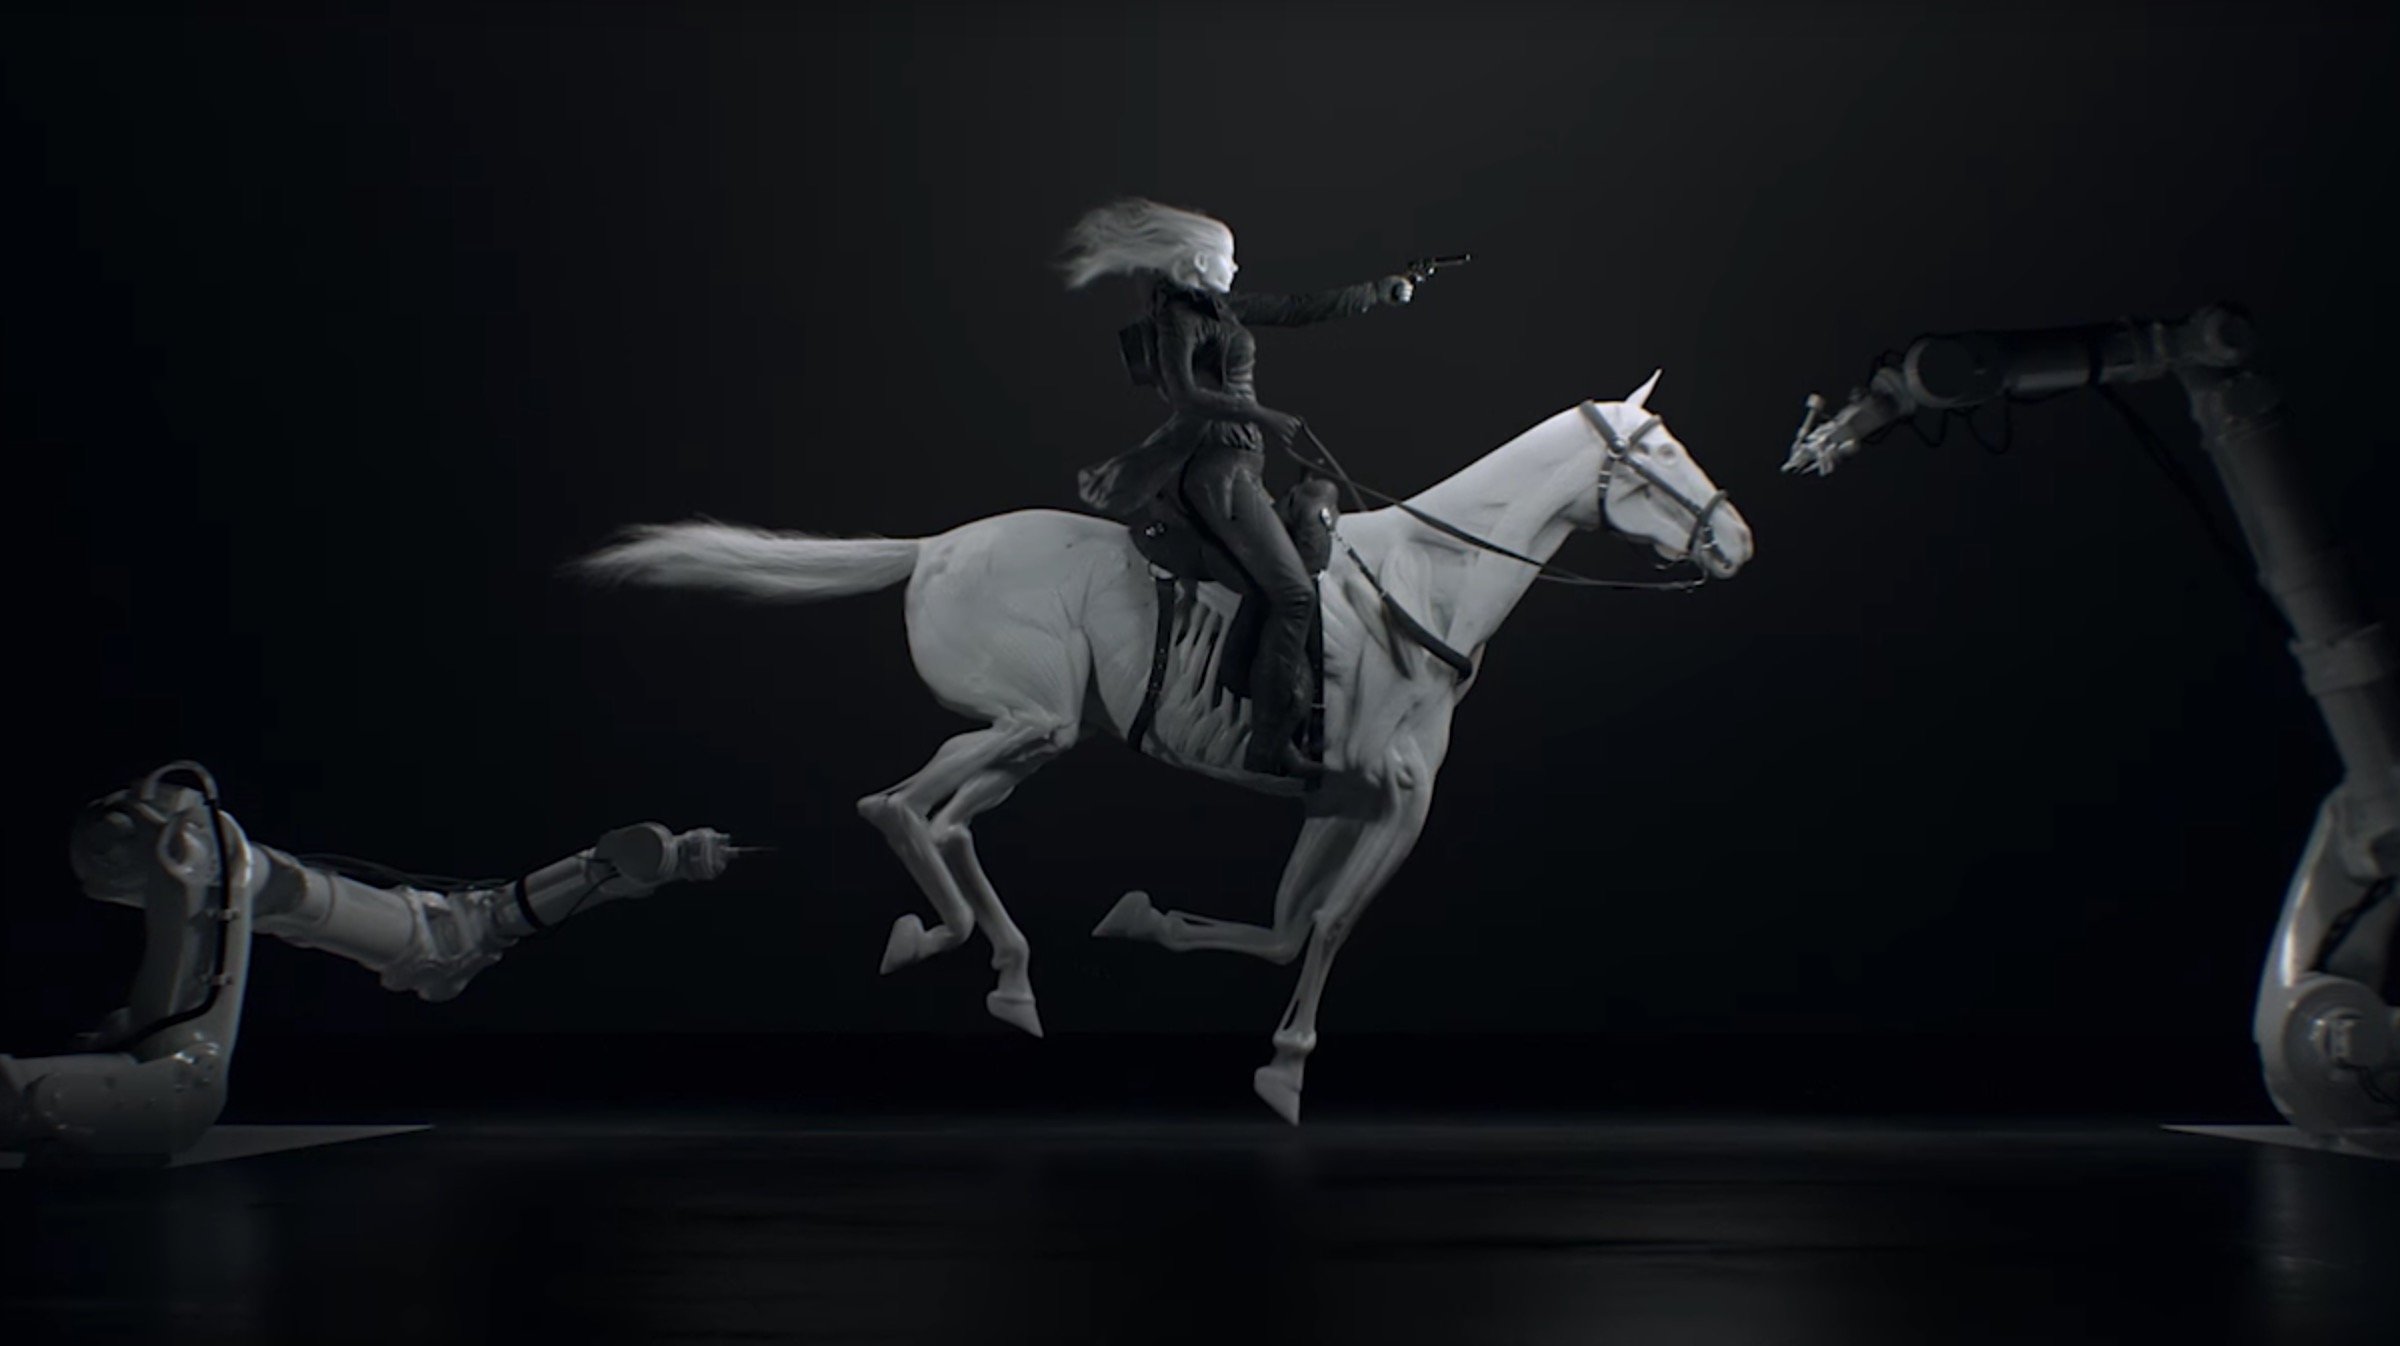  Robotic arms produce a 3D printed horse robot on HBO's Westworld series 